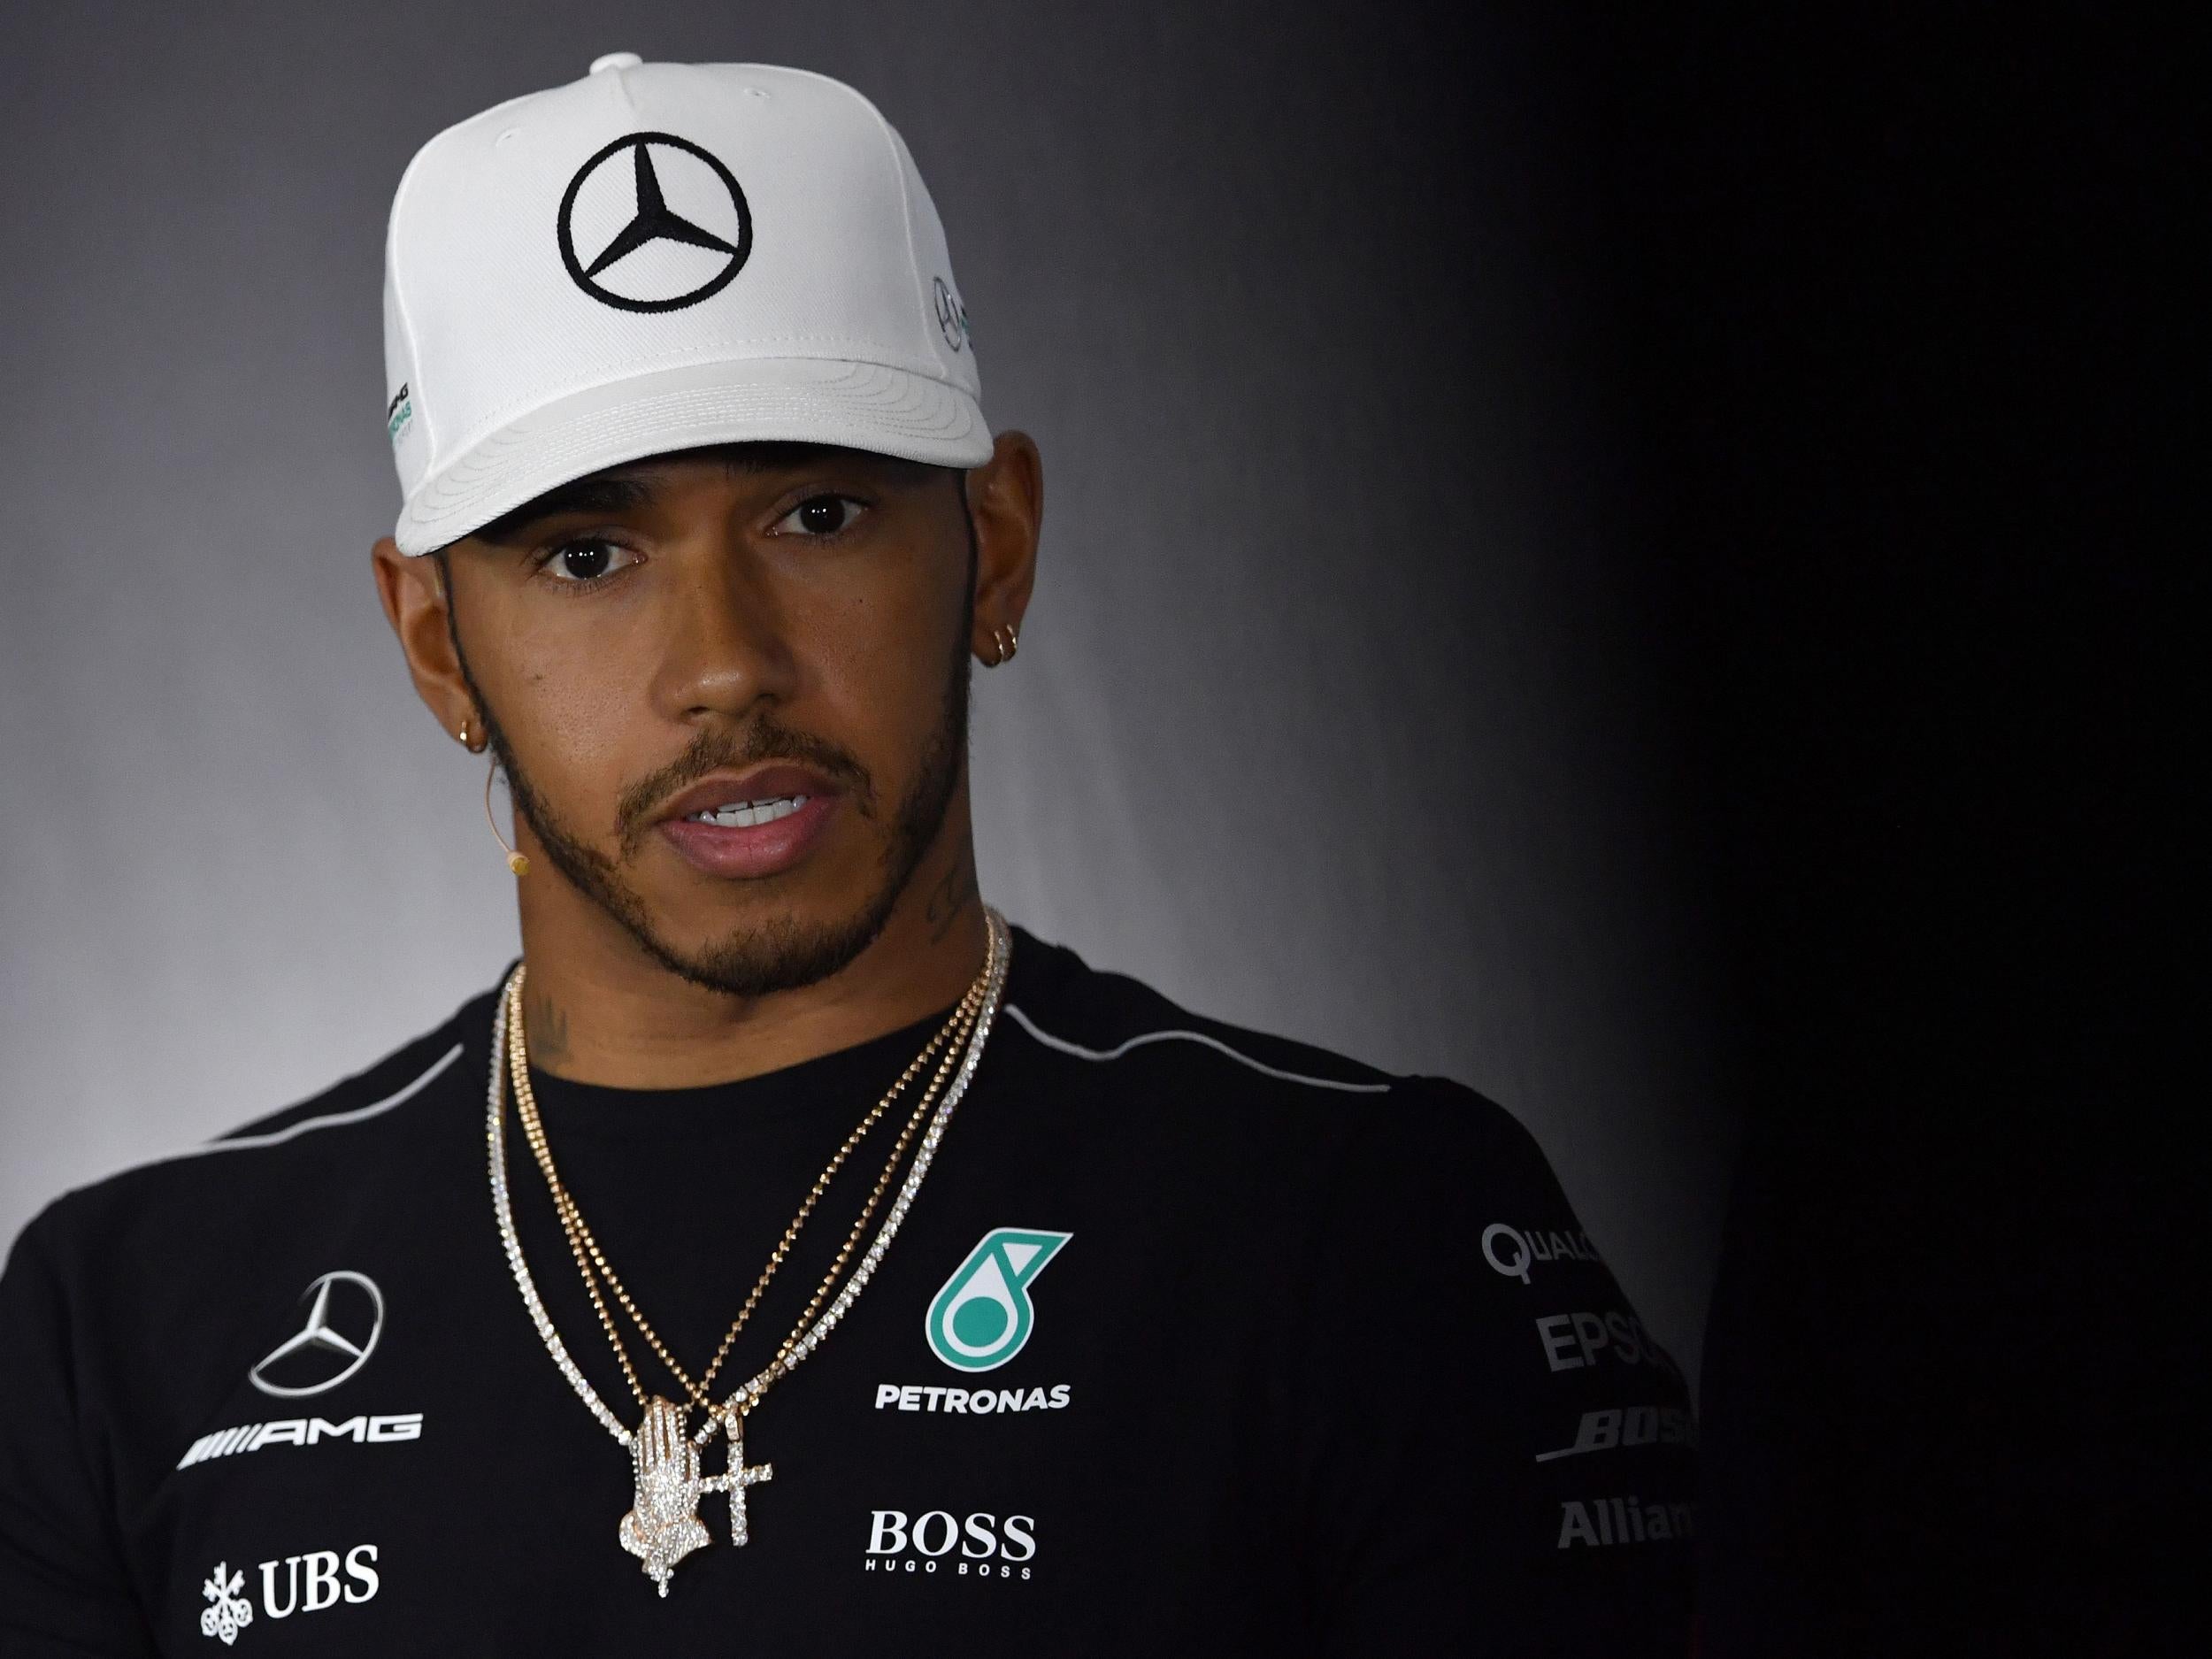 Formula 1's owners were not impressed by Hamilton's decision